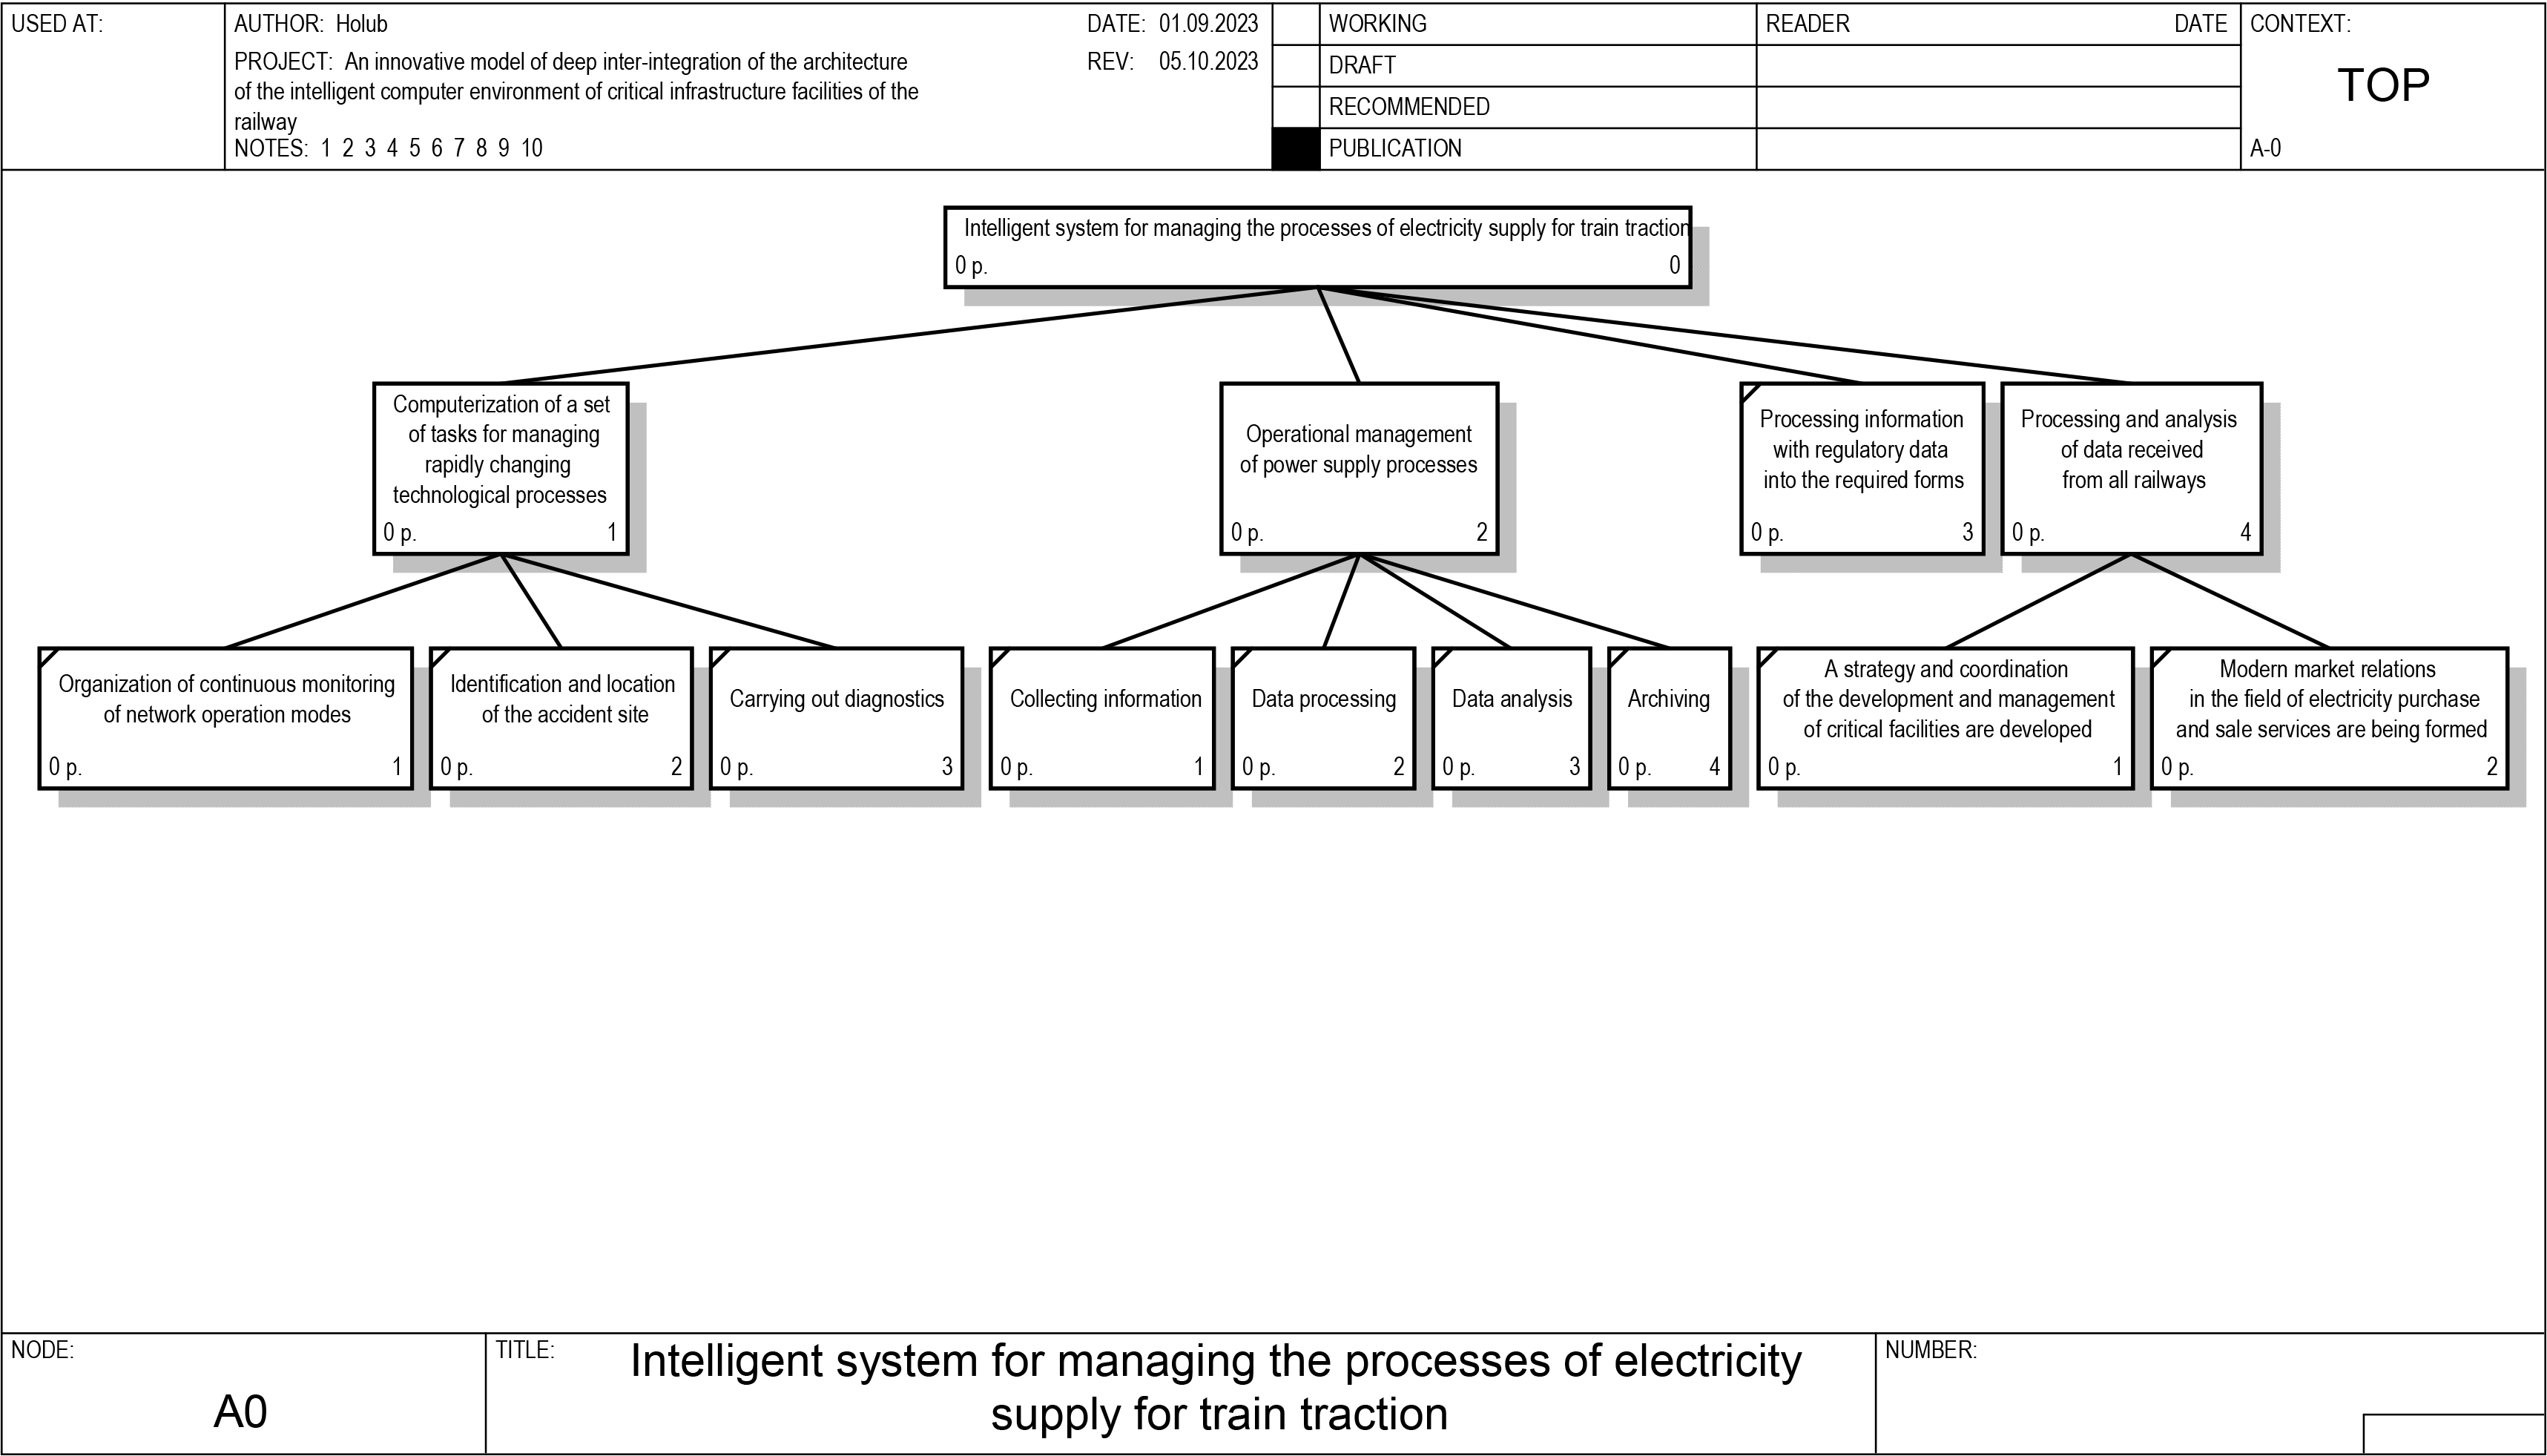 Development of an innovative model for the inter-integration of the architecture of the intelligent computer environment of critical infrastructure facilities of the railway